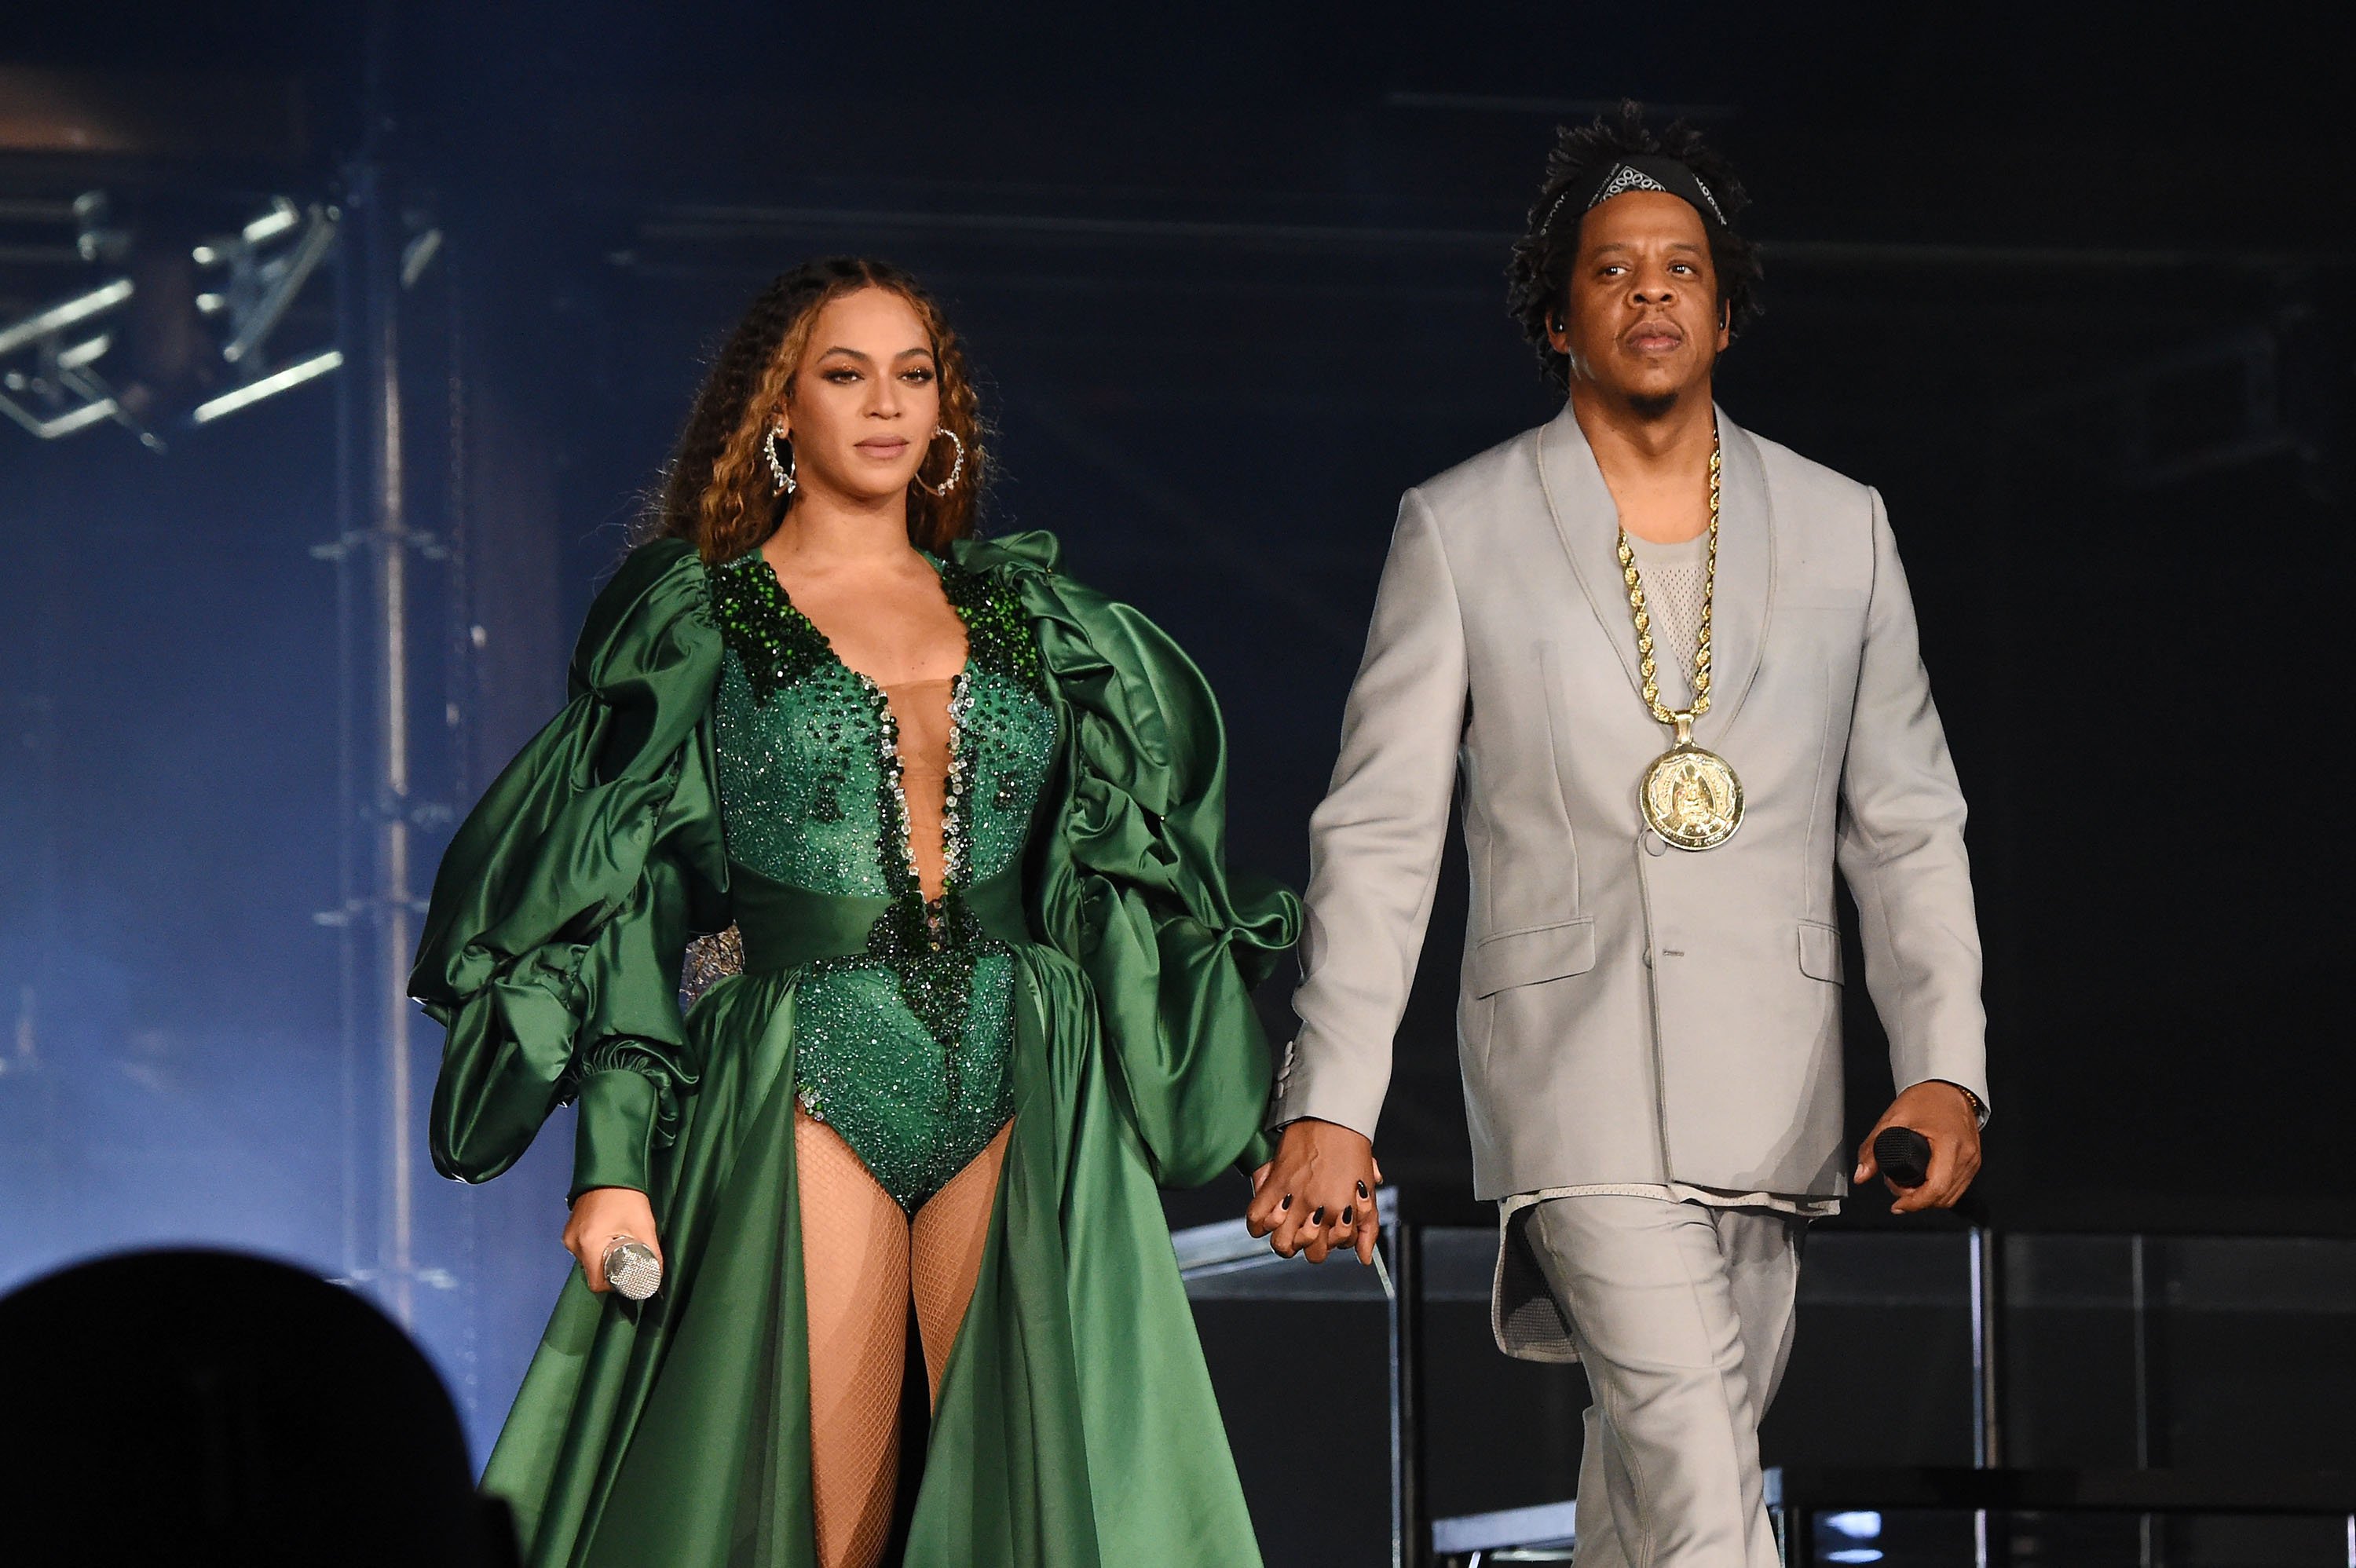 Jay-Z and Beyoncé perform during the Global Citizen Festival: Mandela 100 in South Africa